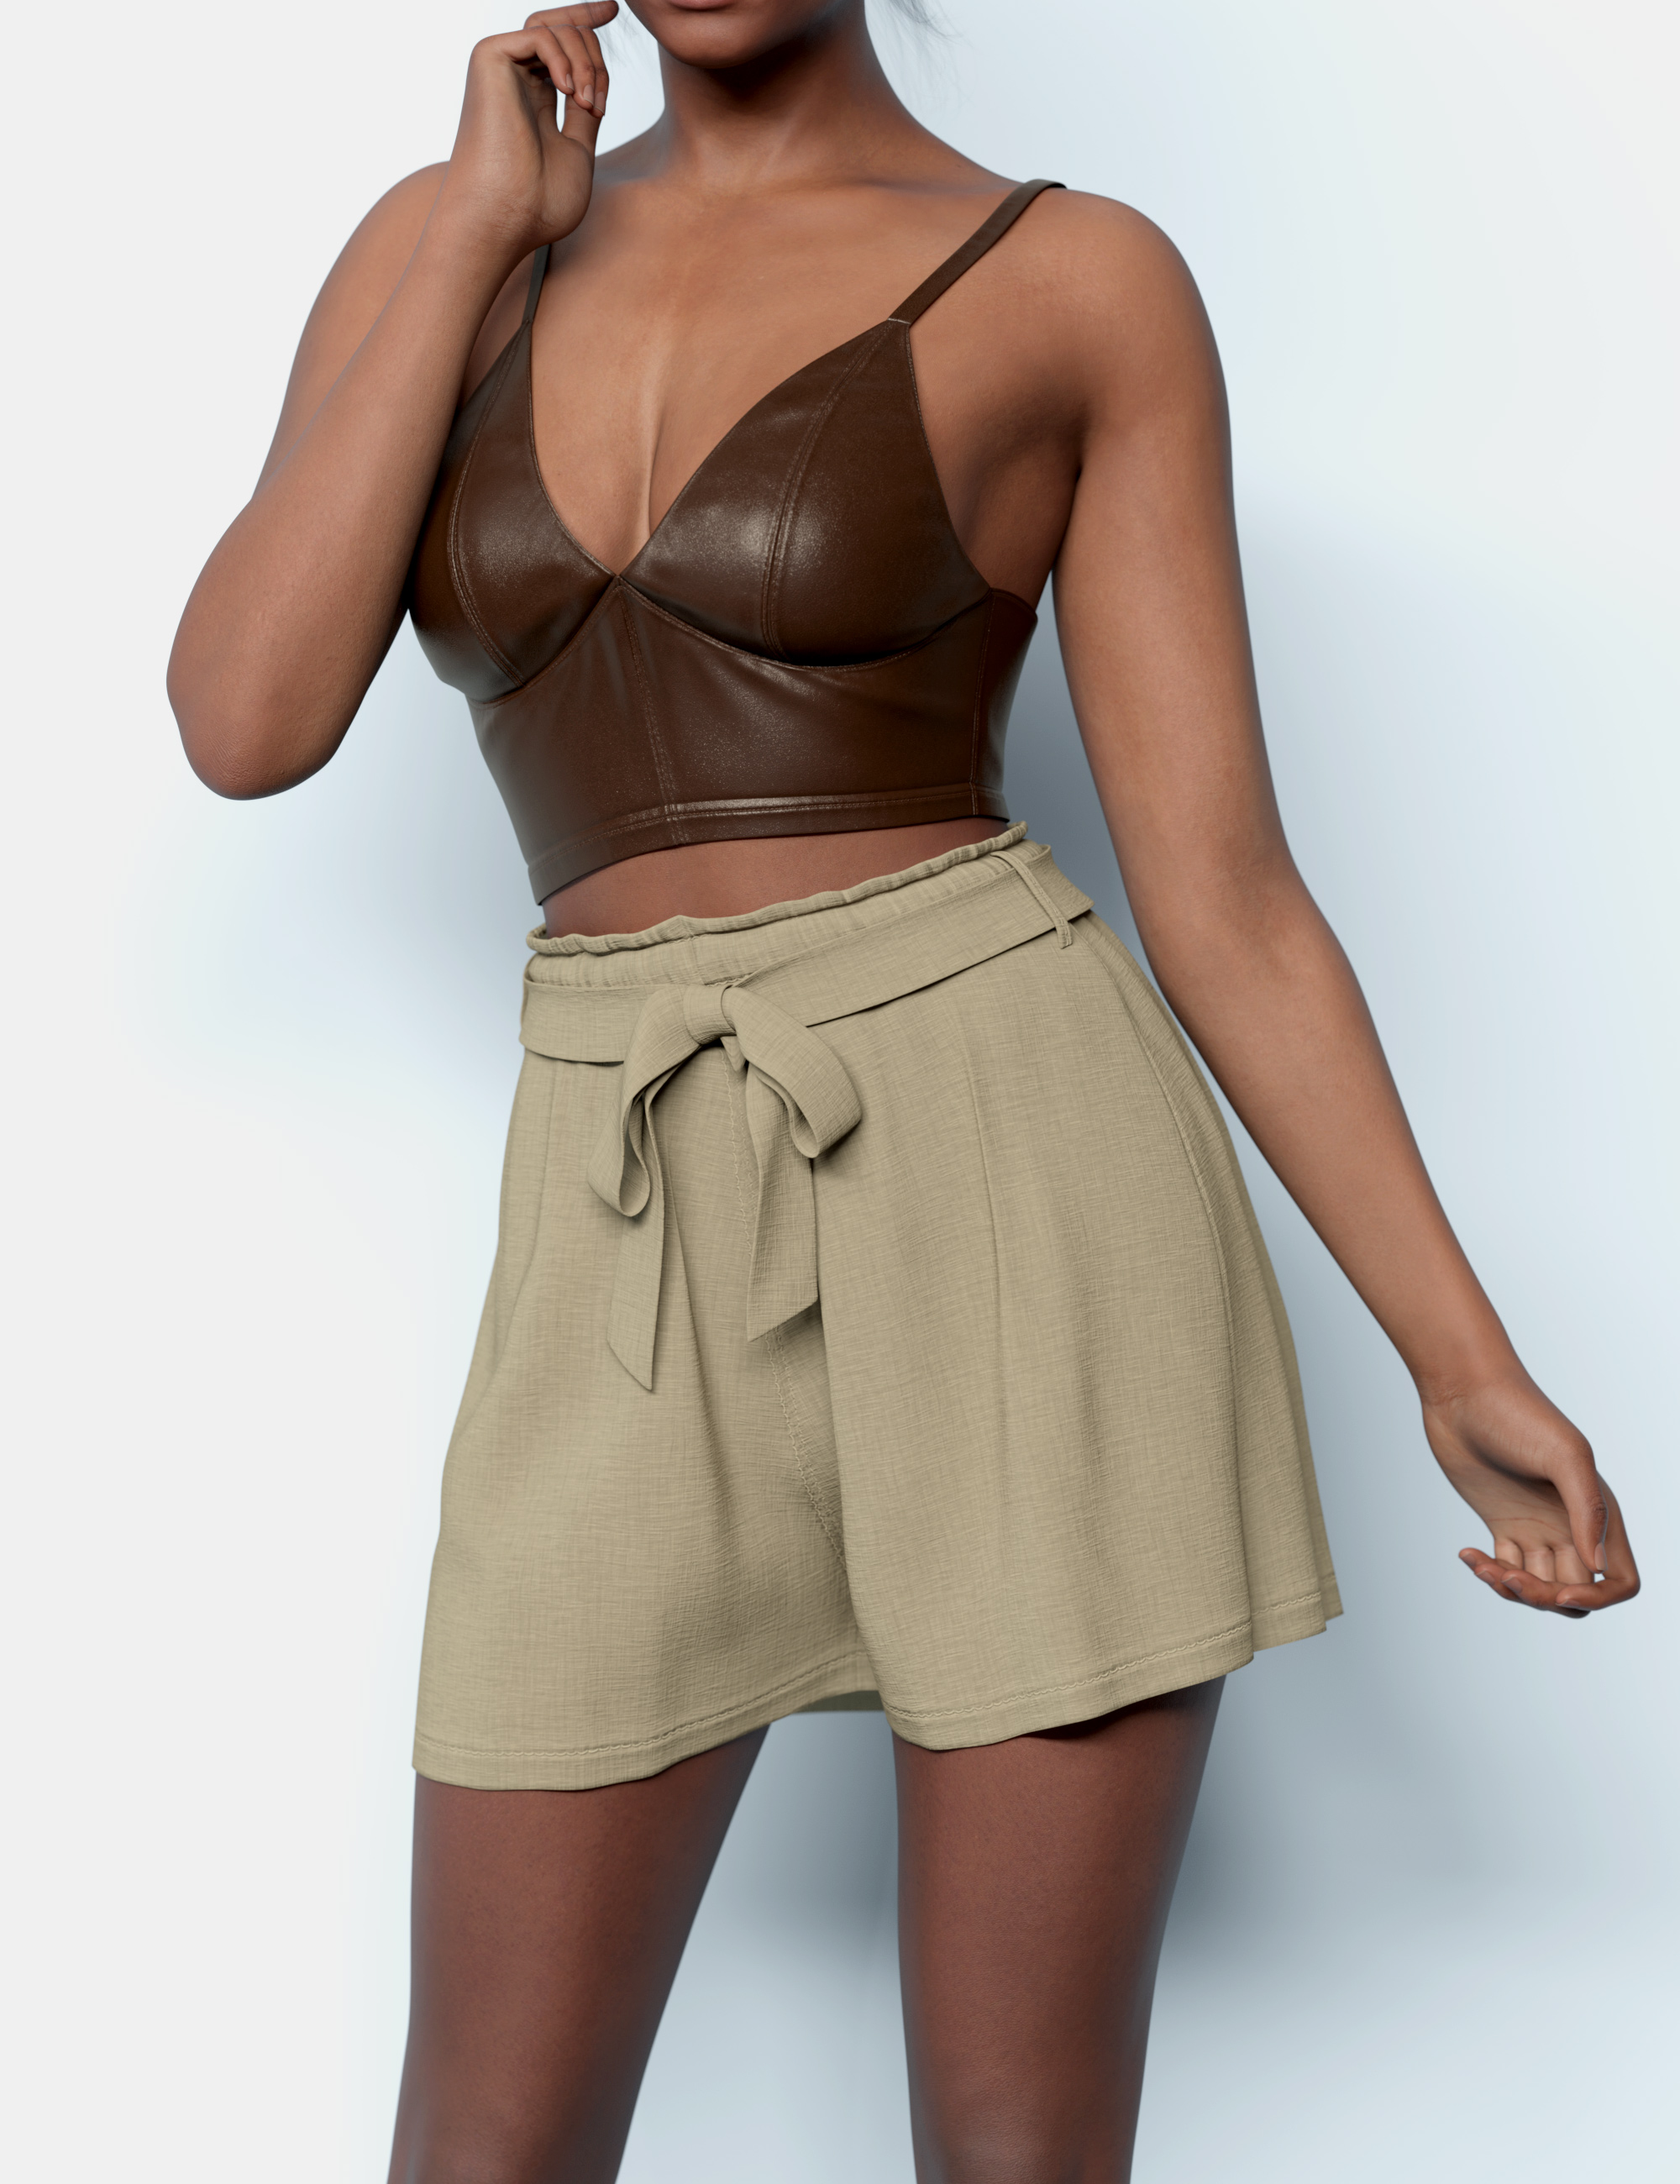 dForce Wide Bow Shorts and Cami Top for Genesis 9 by: outoftouch, 3D Models by Daz 3D